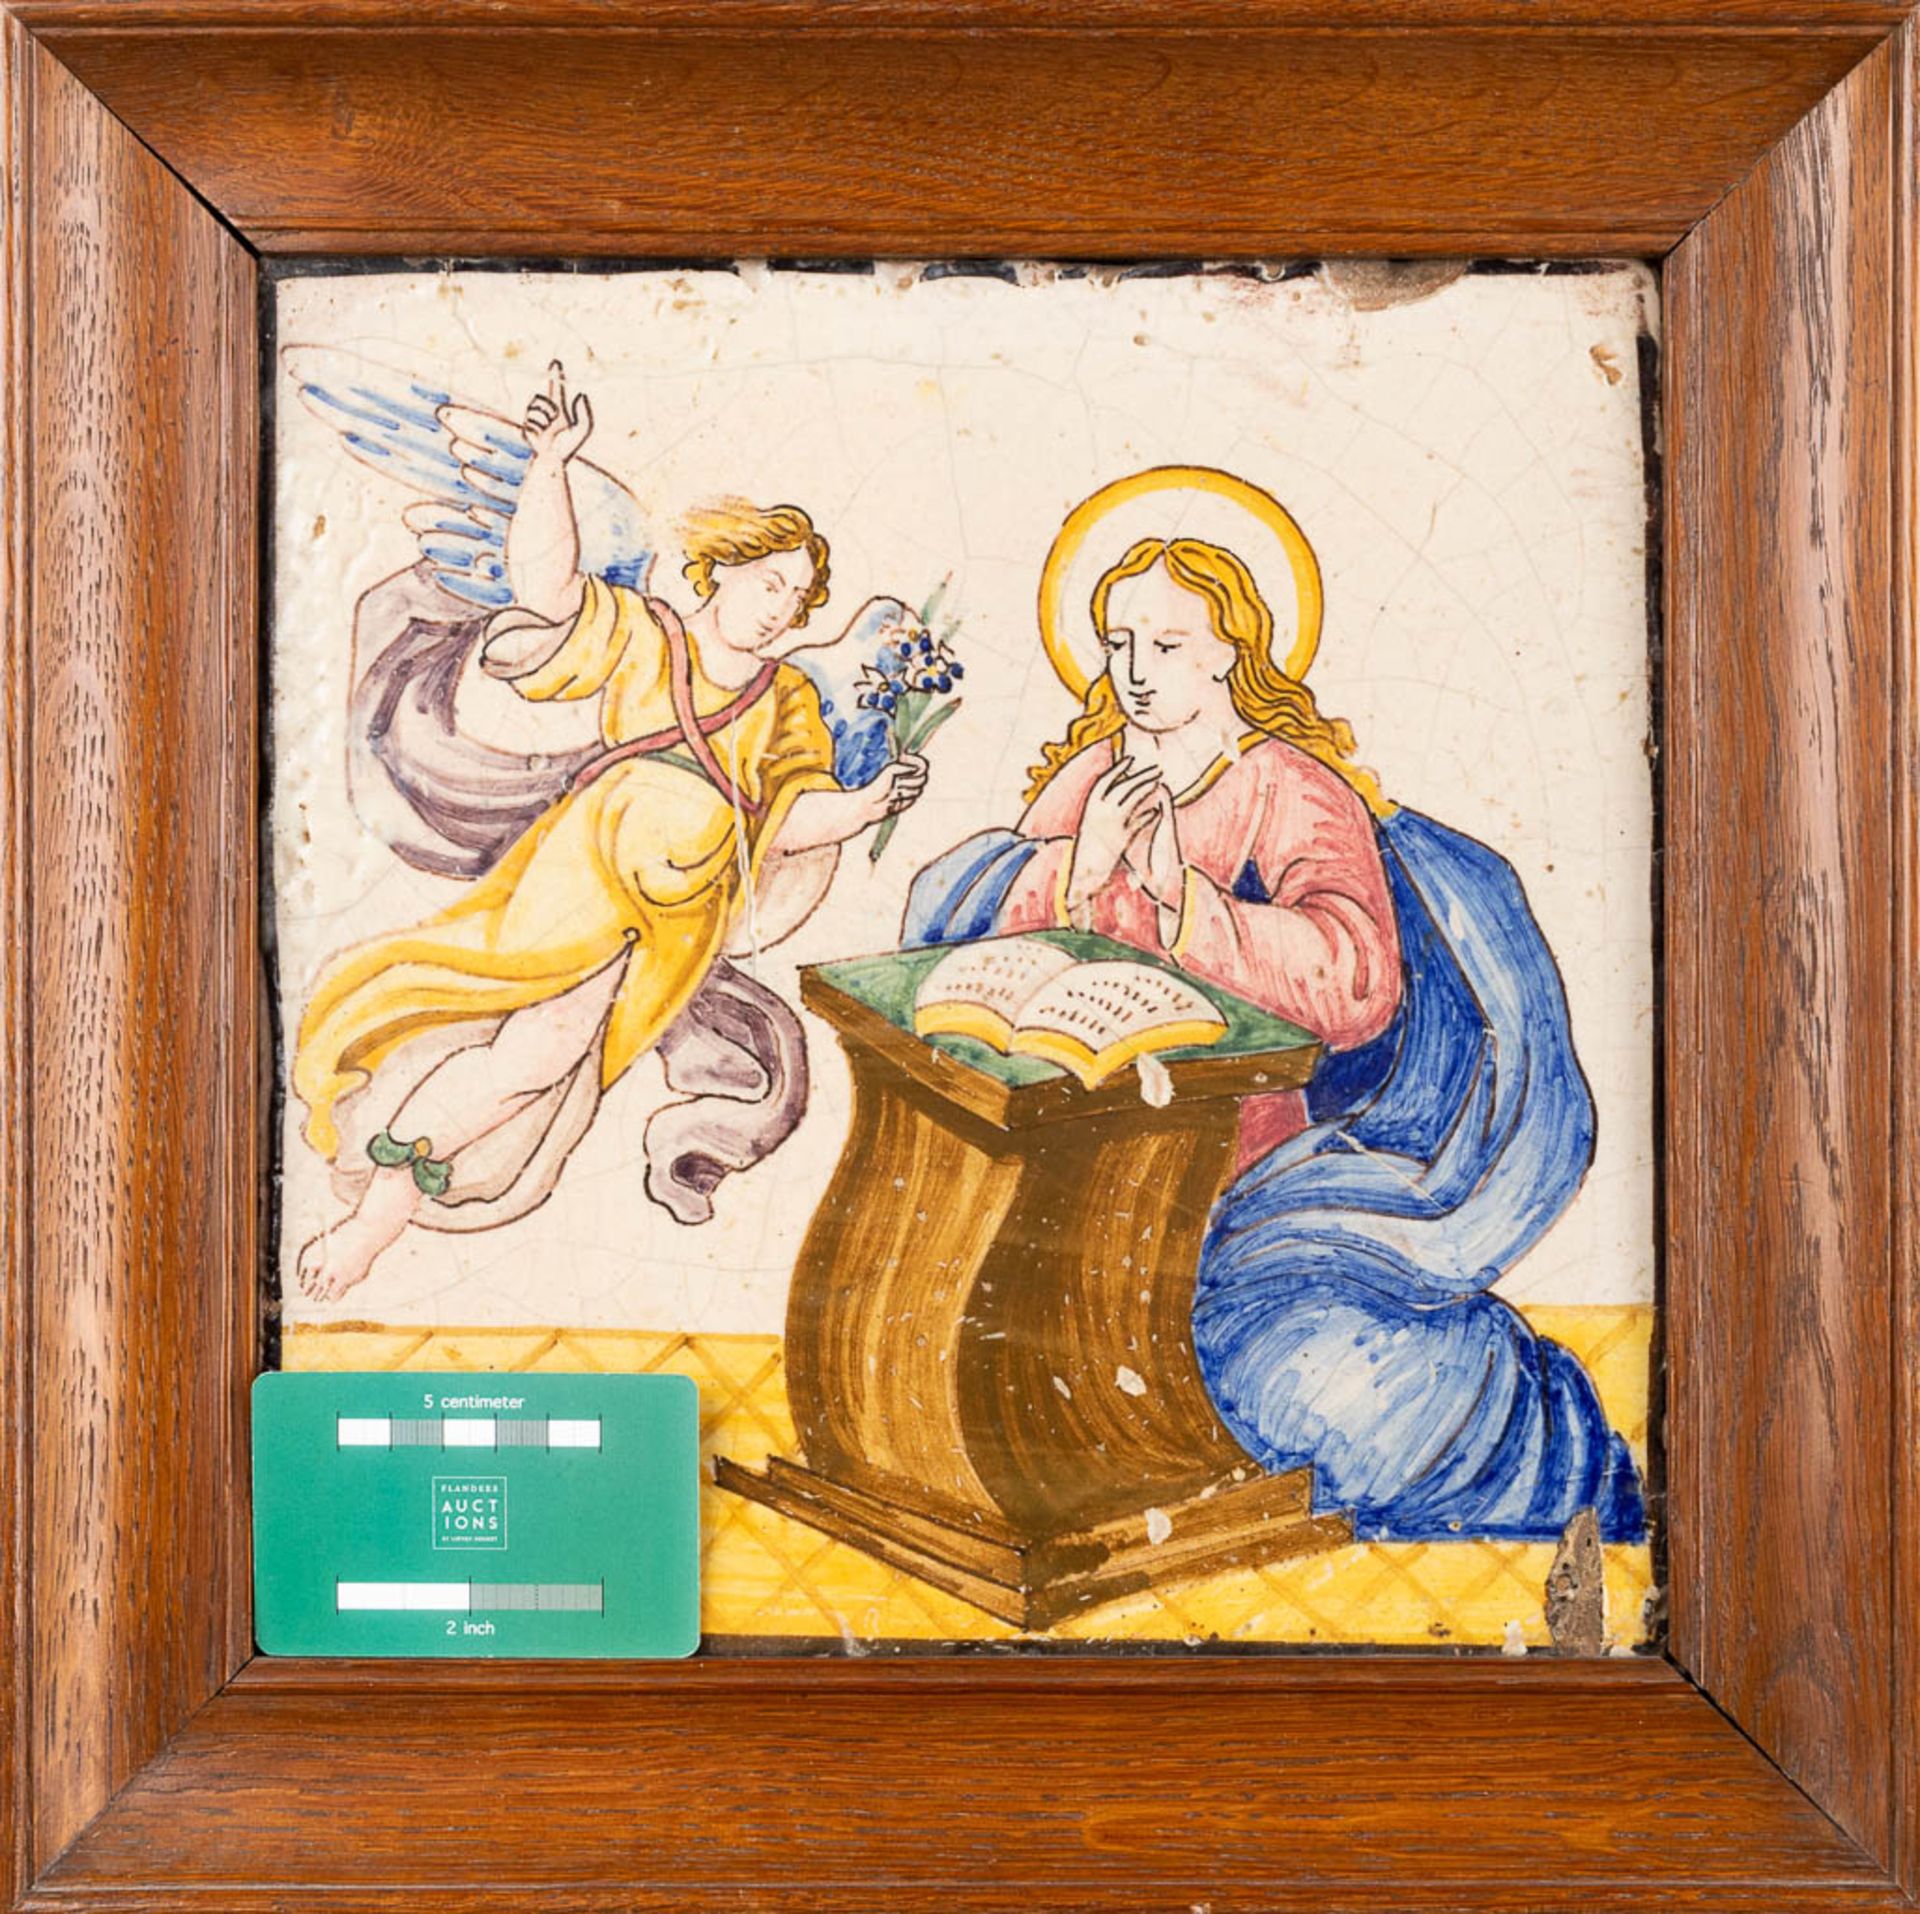 An antique framed tile, 'The Annunciation' by Archangel Gabriel. 18th C. (W:27 x H:27 cm) - Image 2 of 6